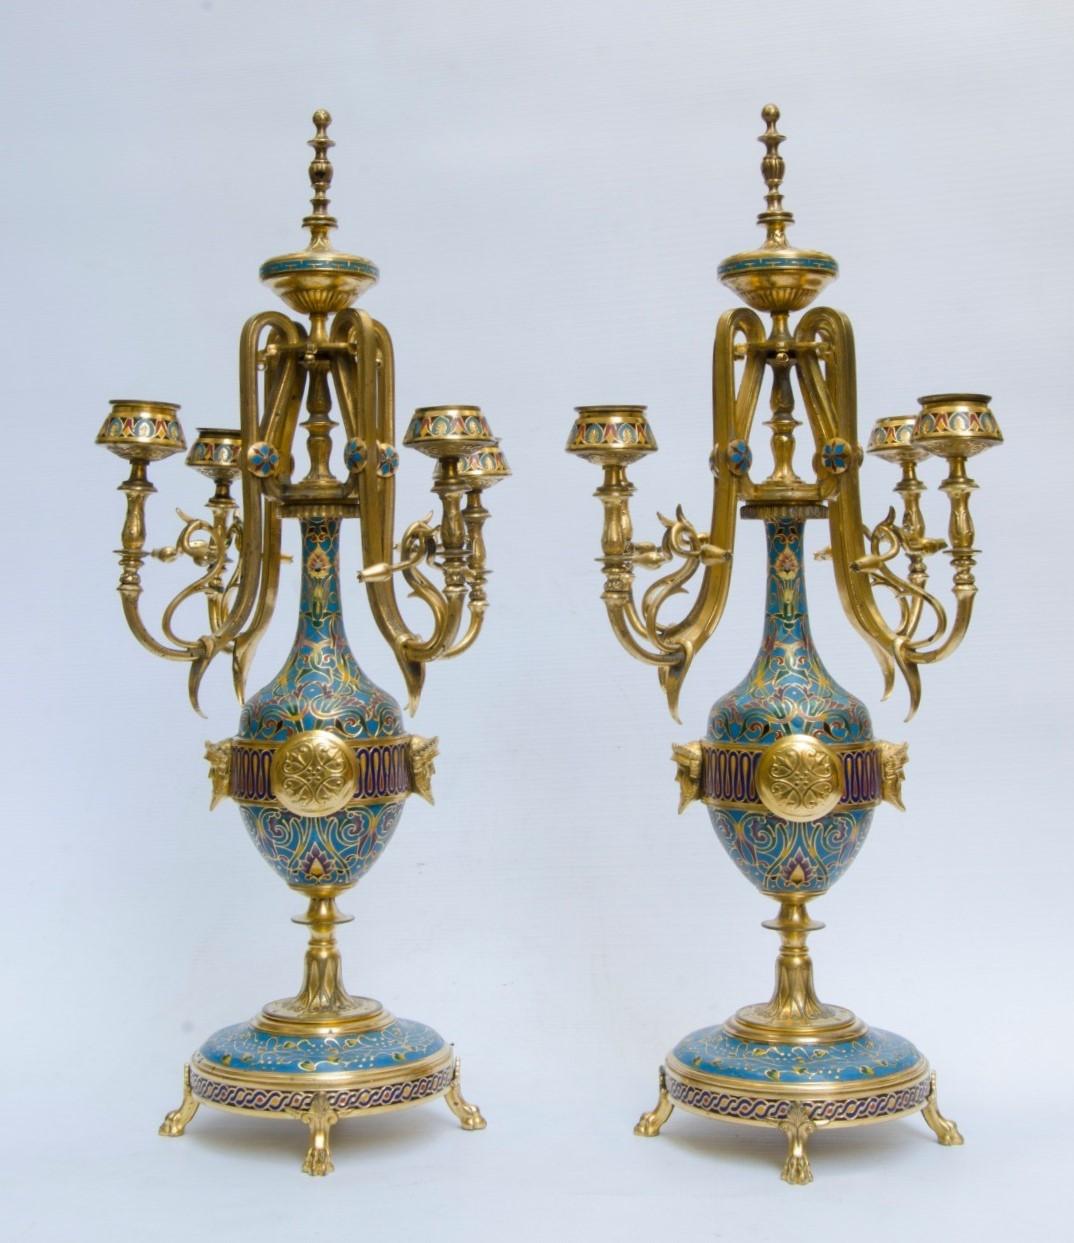 19th Century Barbedienne French Champleve Enamel and Gilt bronze clock set For Sale 5